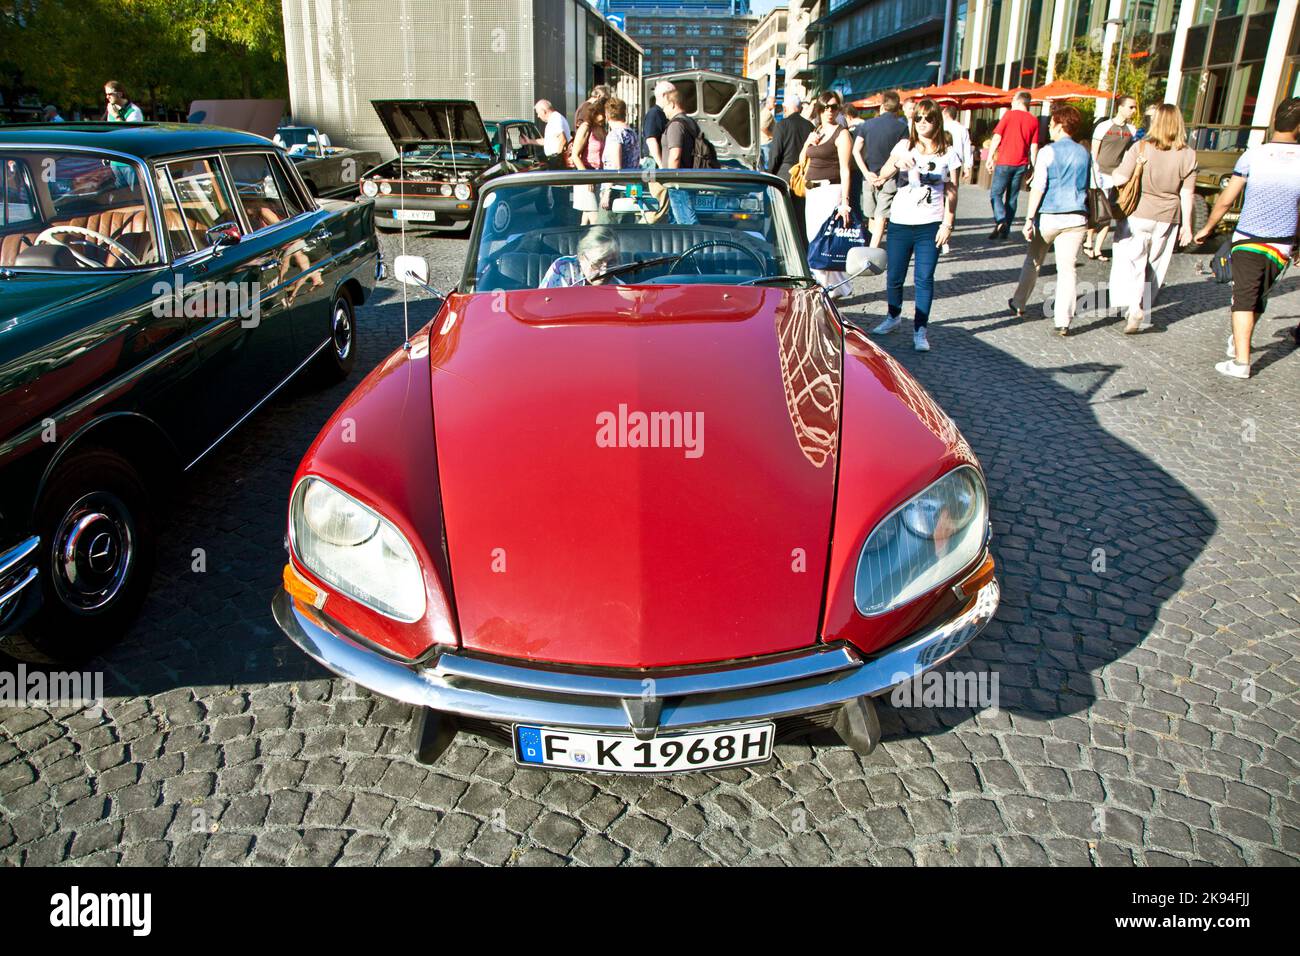 FRANKFURT, GERMANY - OCT 2:  Oldtimer Meeting on OCT 2,2011 in Frankfurt, Germany. A Citroen CV Oldtimer presented by the event '7. Oldtimercity' orga Stock Photo